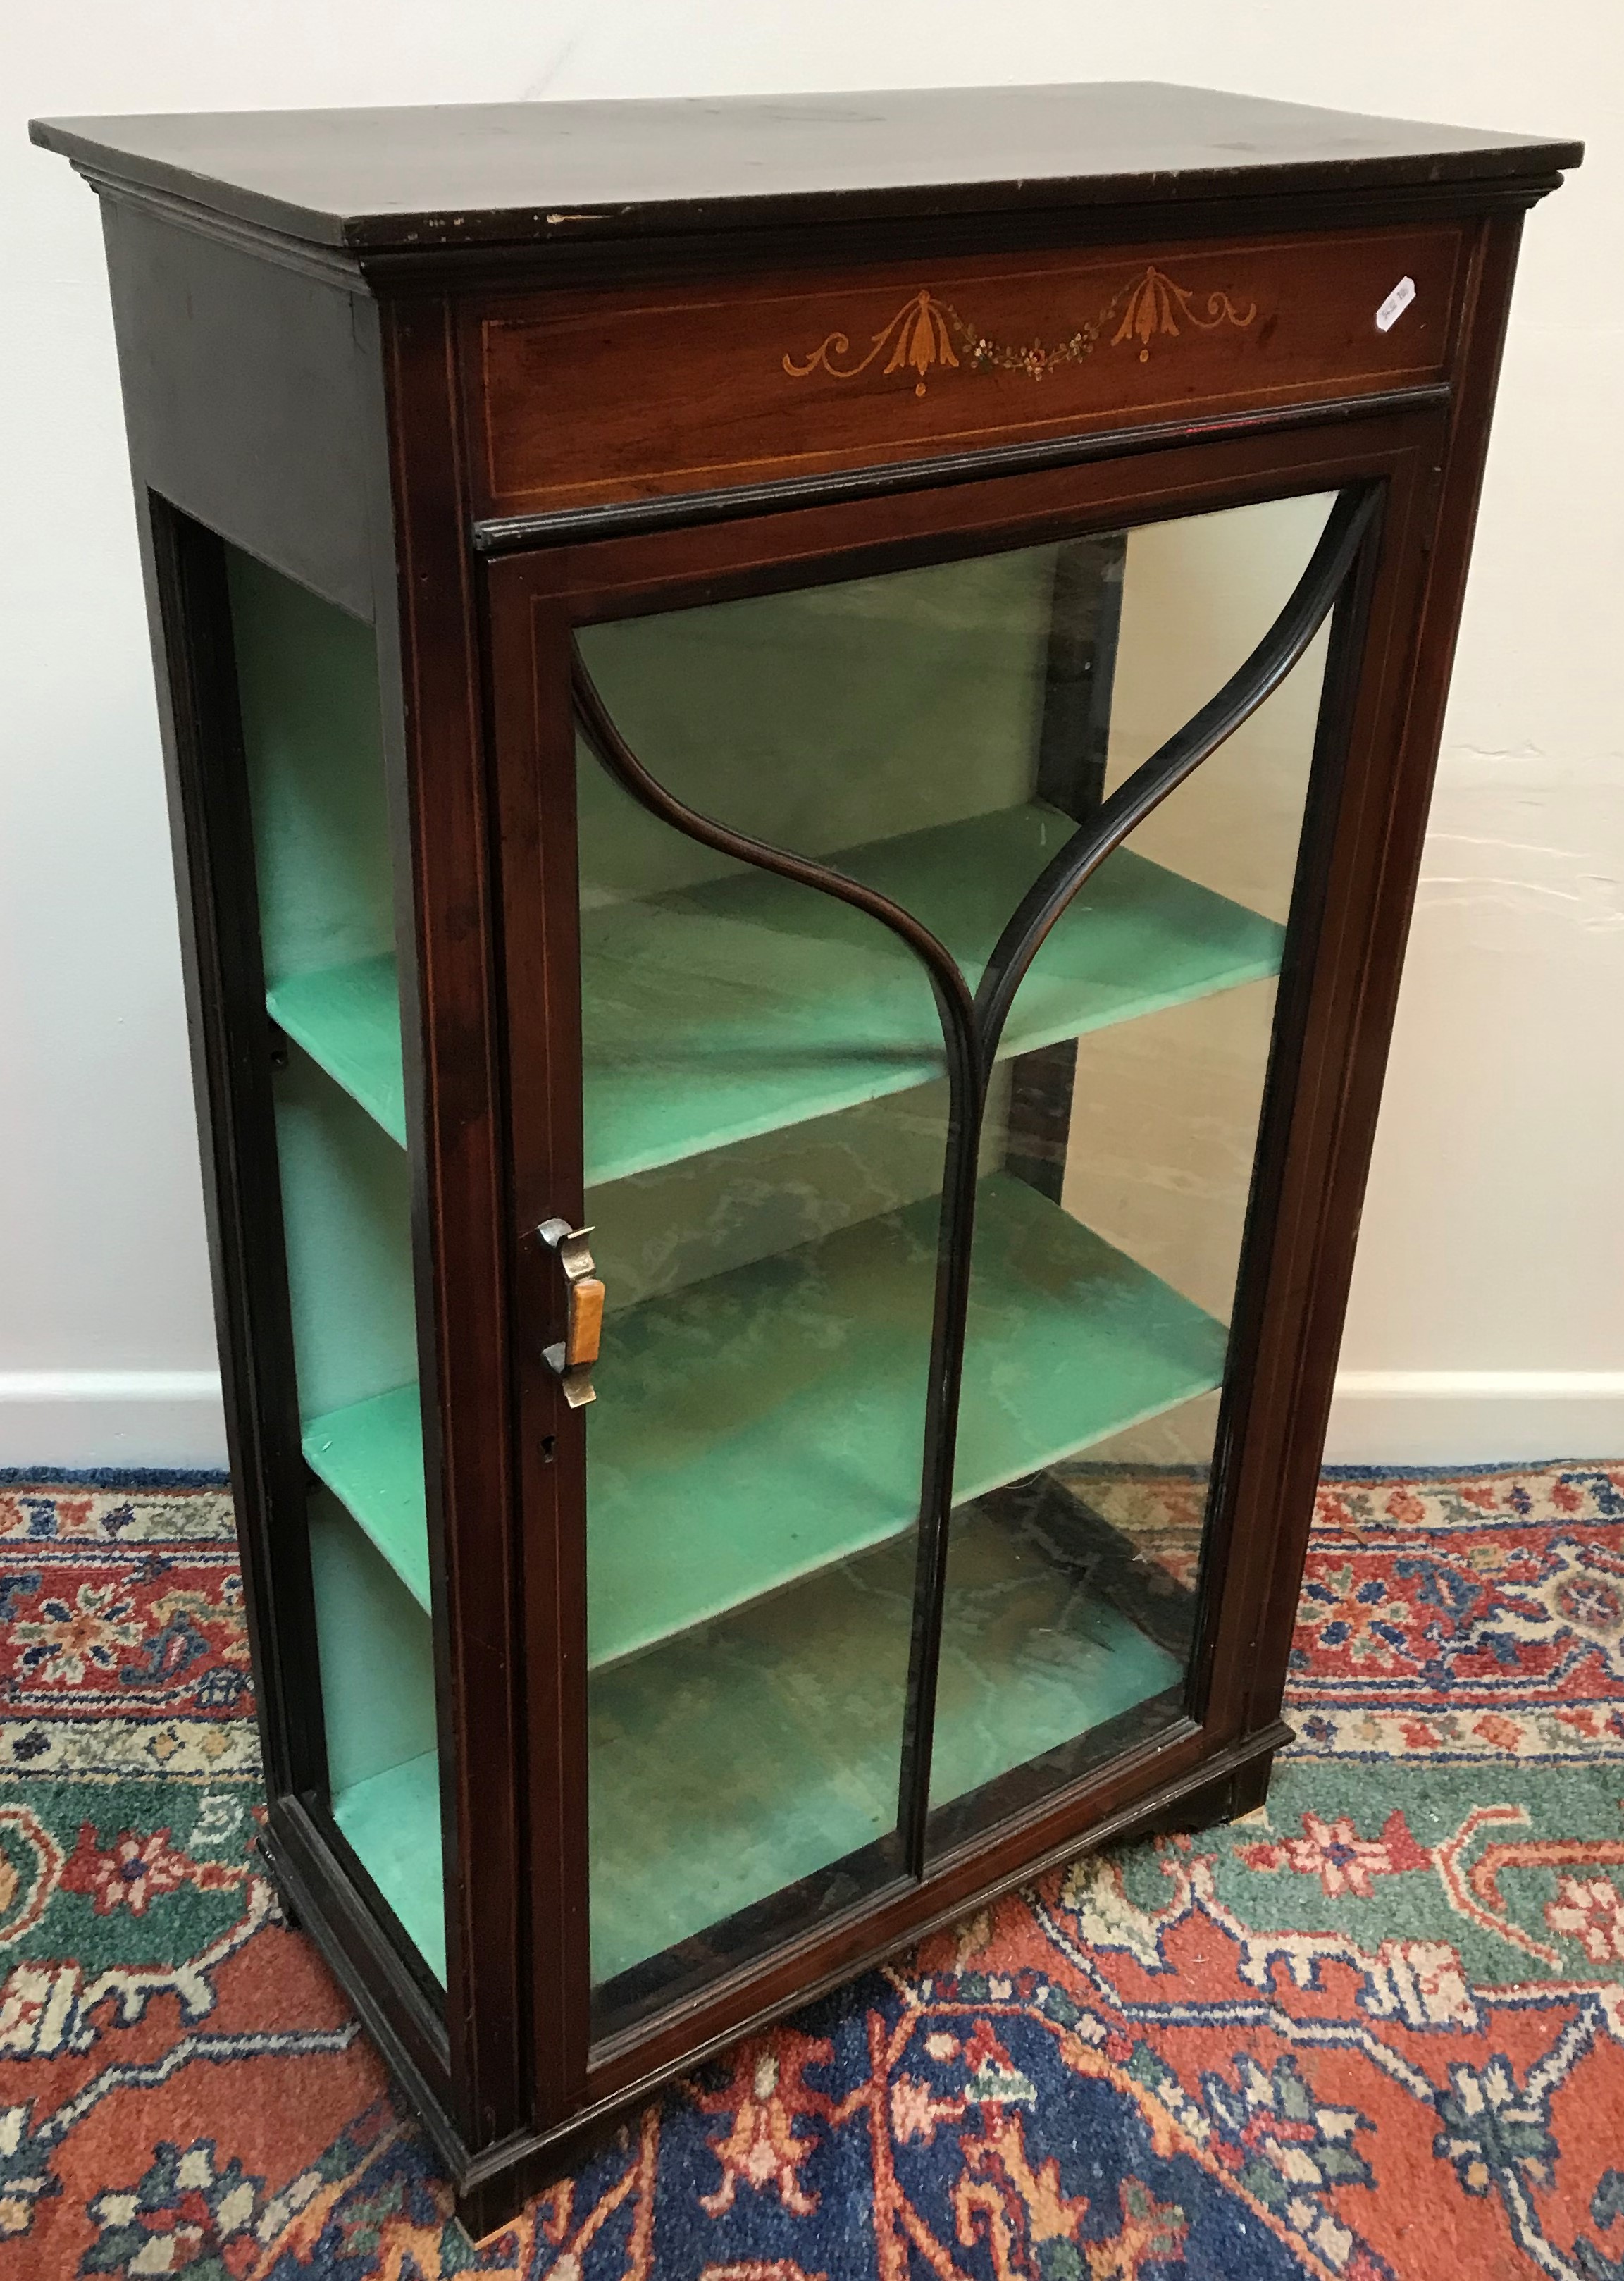 An Edwardian mahogany display cabinet with simulated marquetry inlaid decorated frieze over a - Image 3 of 3